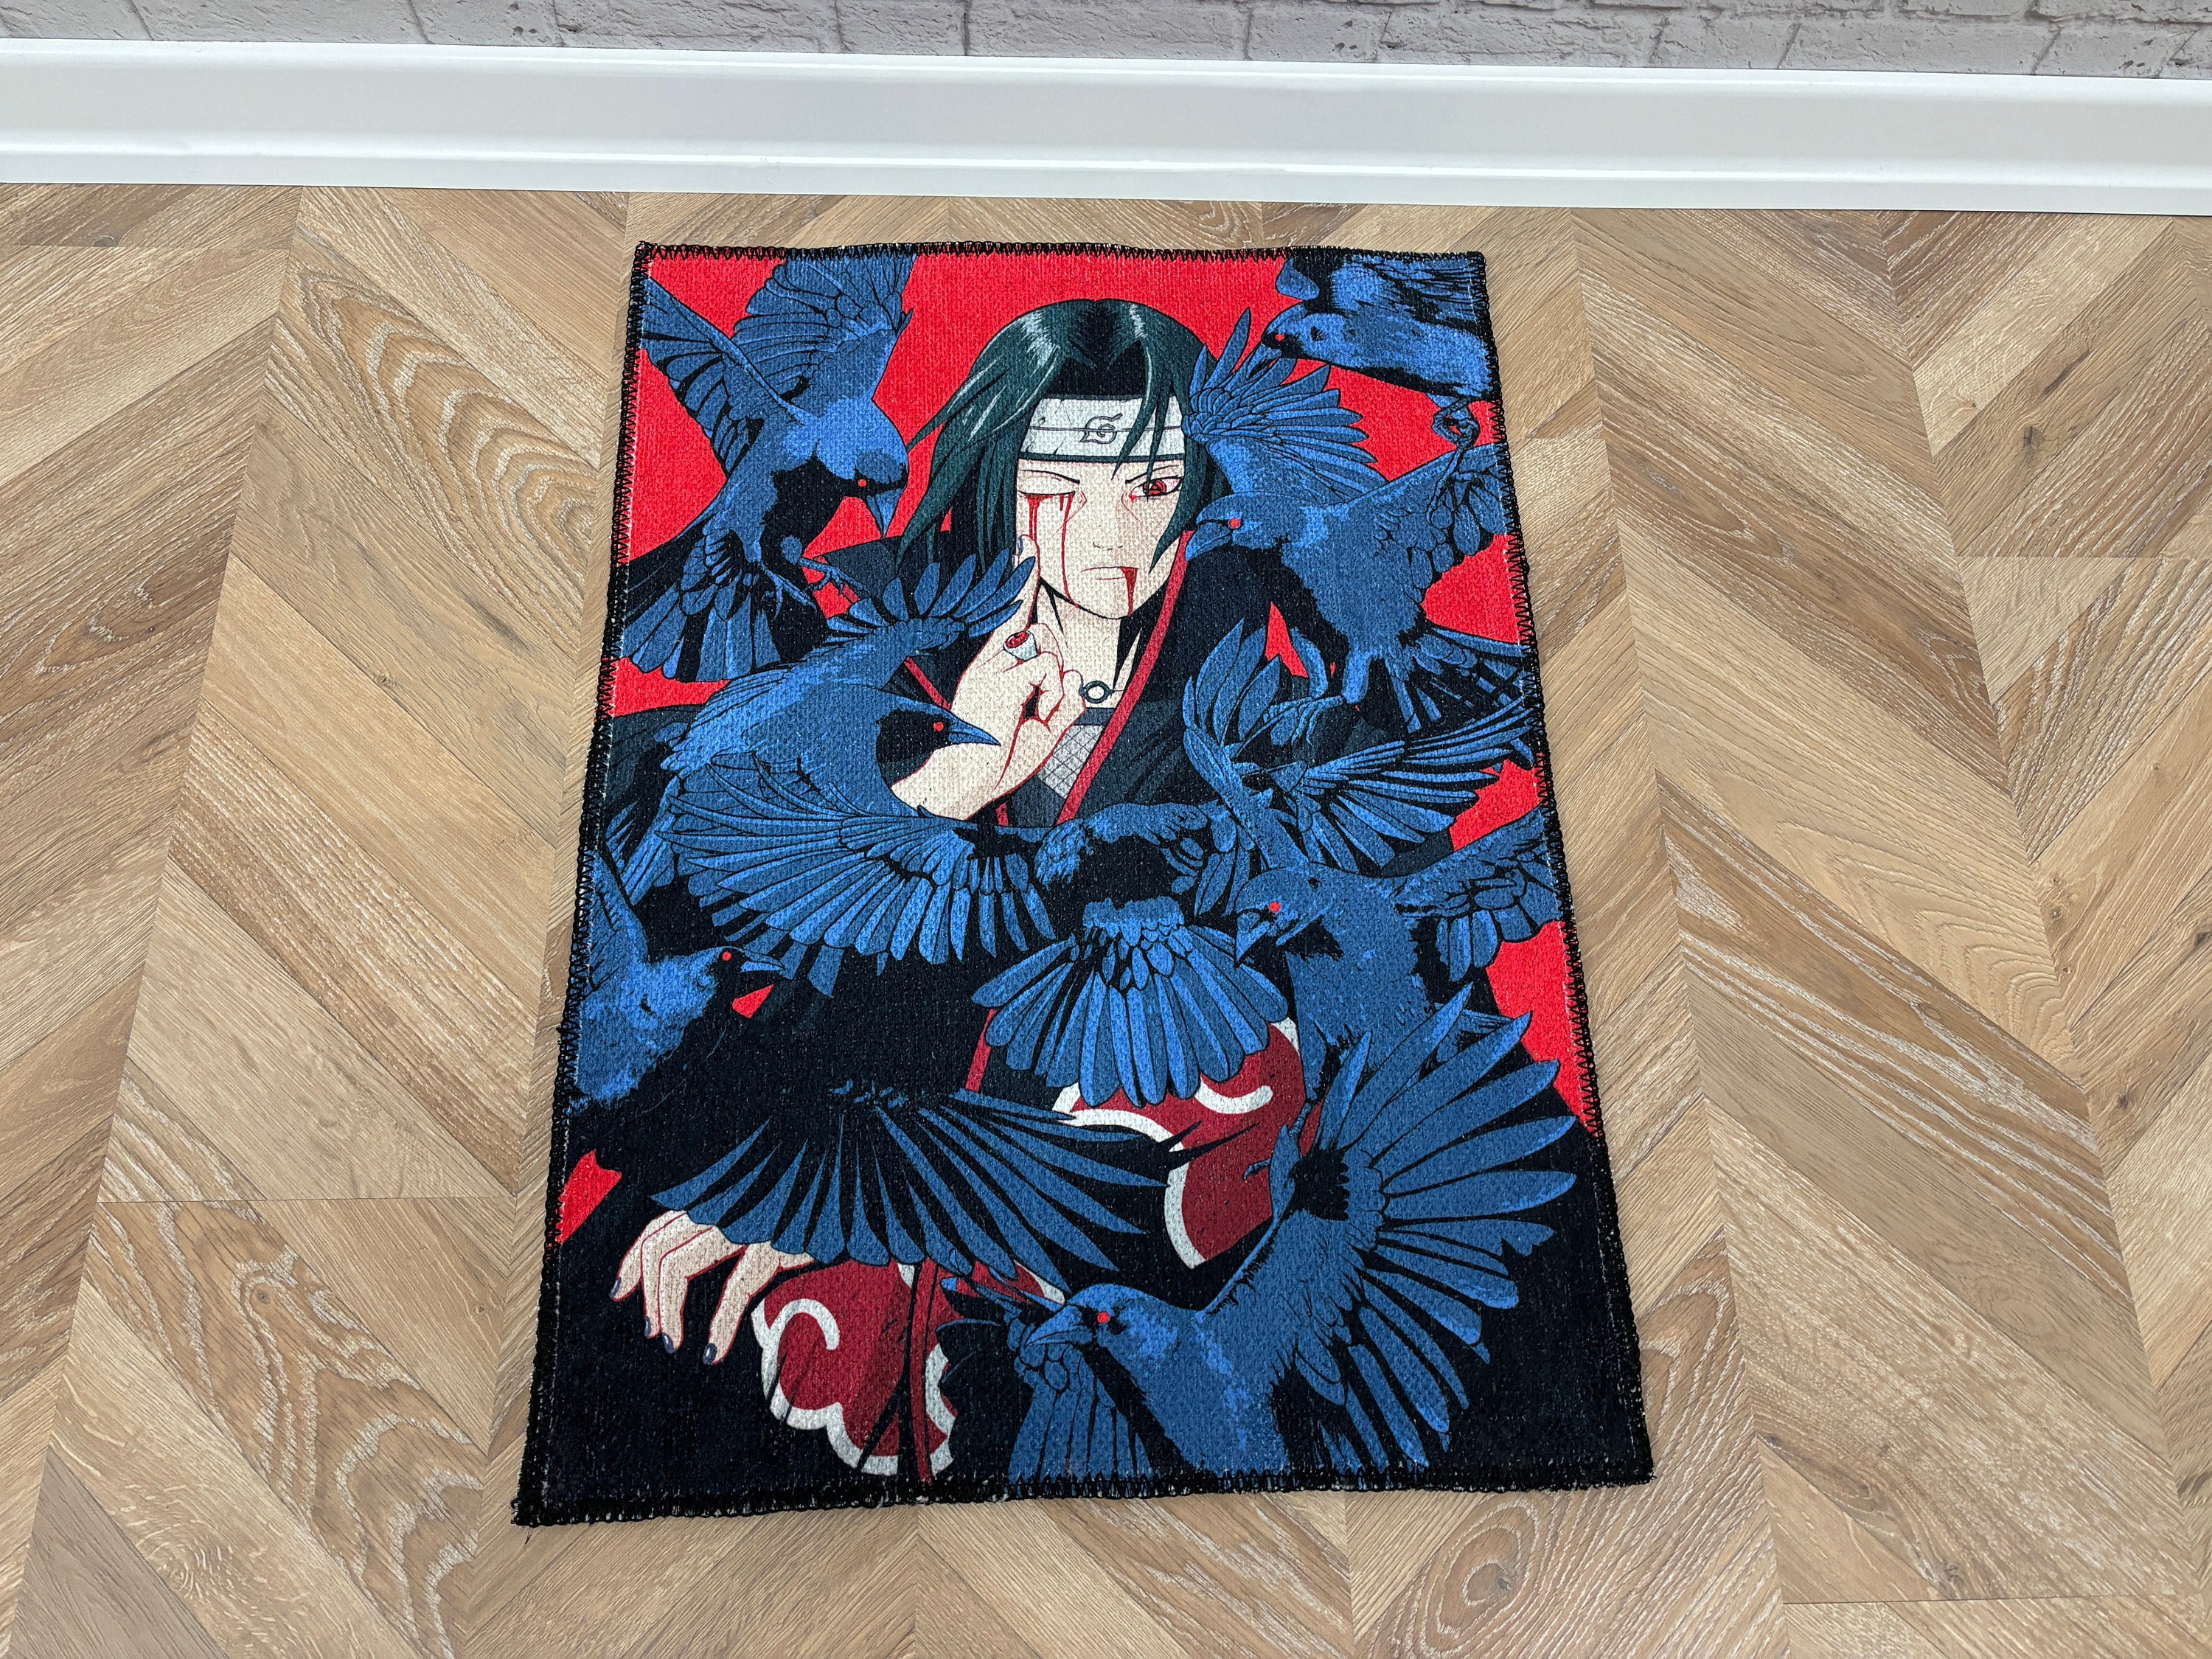 Kawaii Cartoon Gym Carpet For Kids Aesthetics Game Console Symbols Design,  Perfect For Living Room, Bedroom, And Anime Decor Furry Mat For Teenagers  230812 From Heng09, $15.44 | DHgate.Com